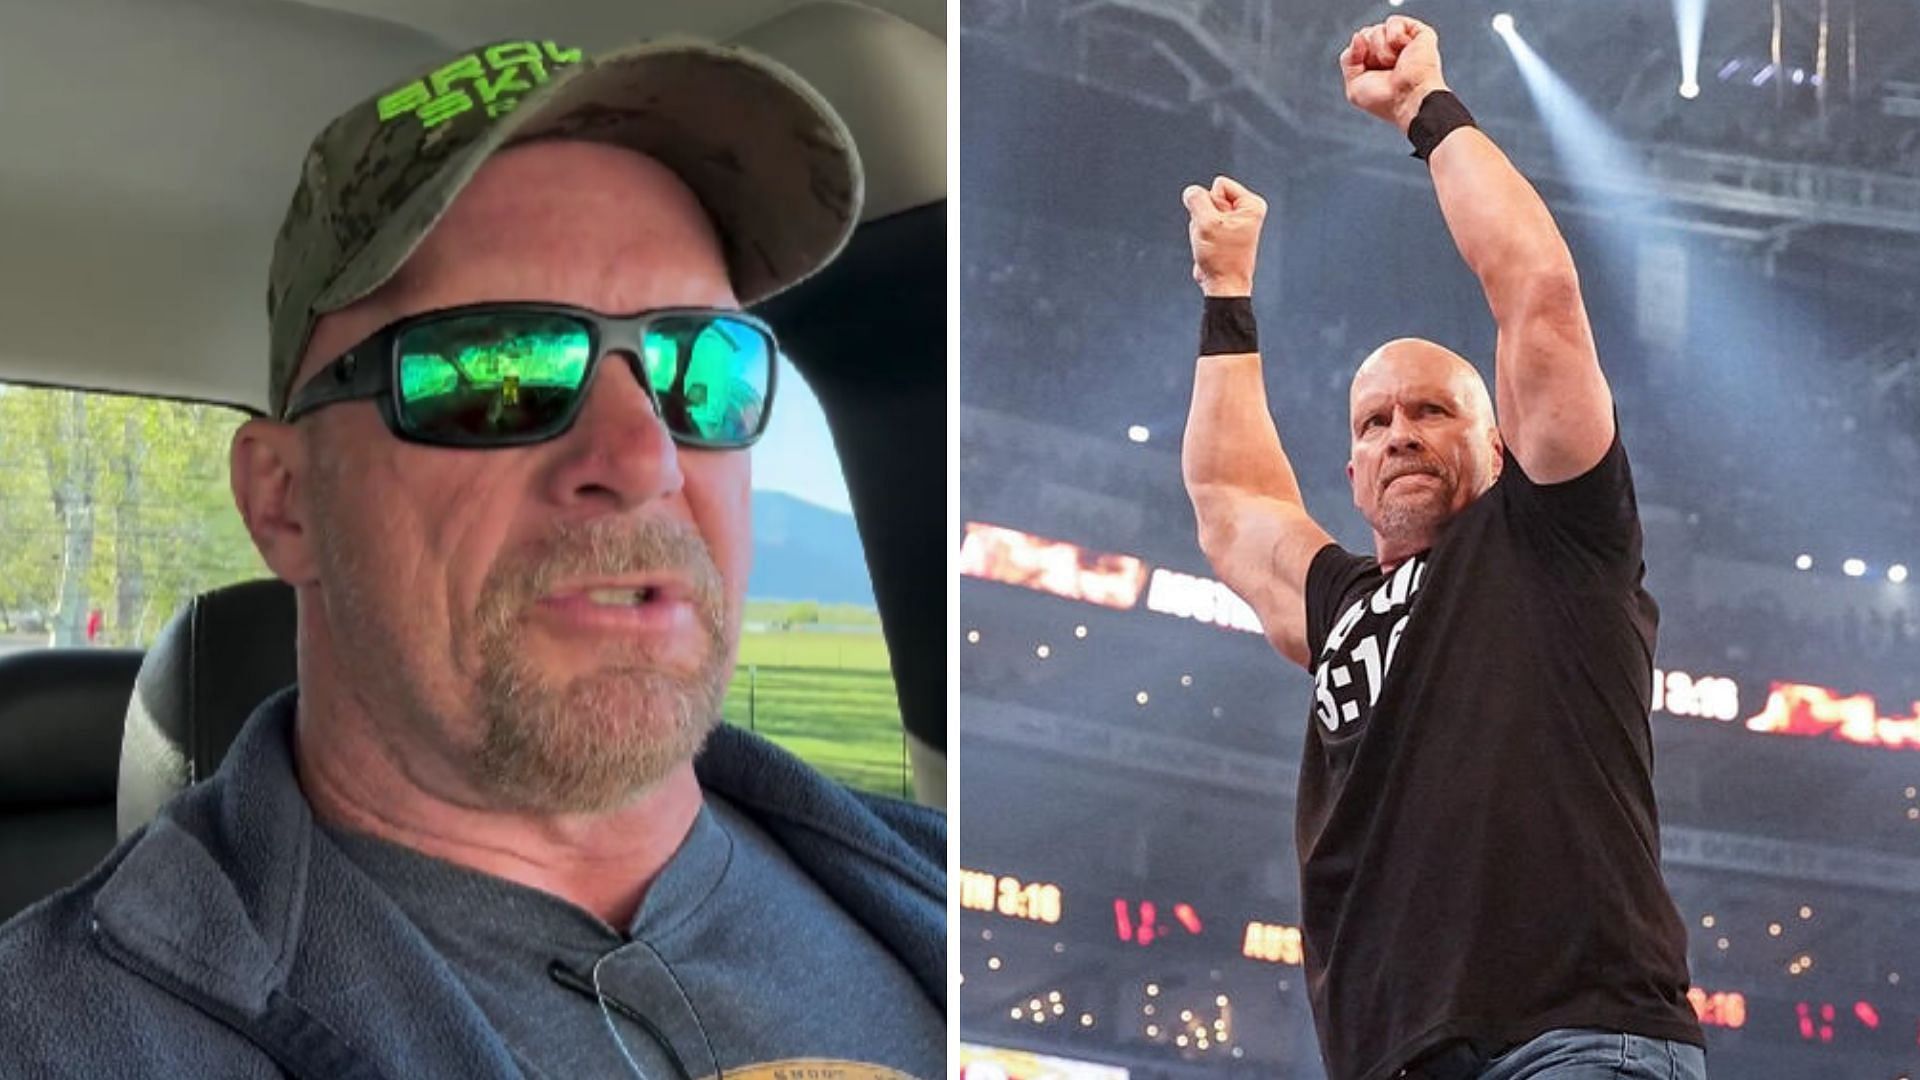 Stone Cold Steve Austin is a WWE Hall of Famer [Image credits: star